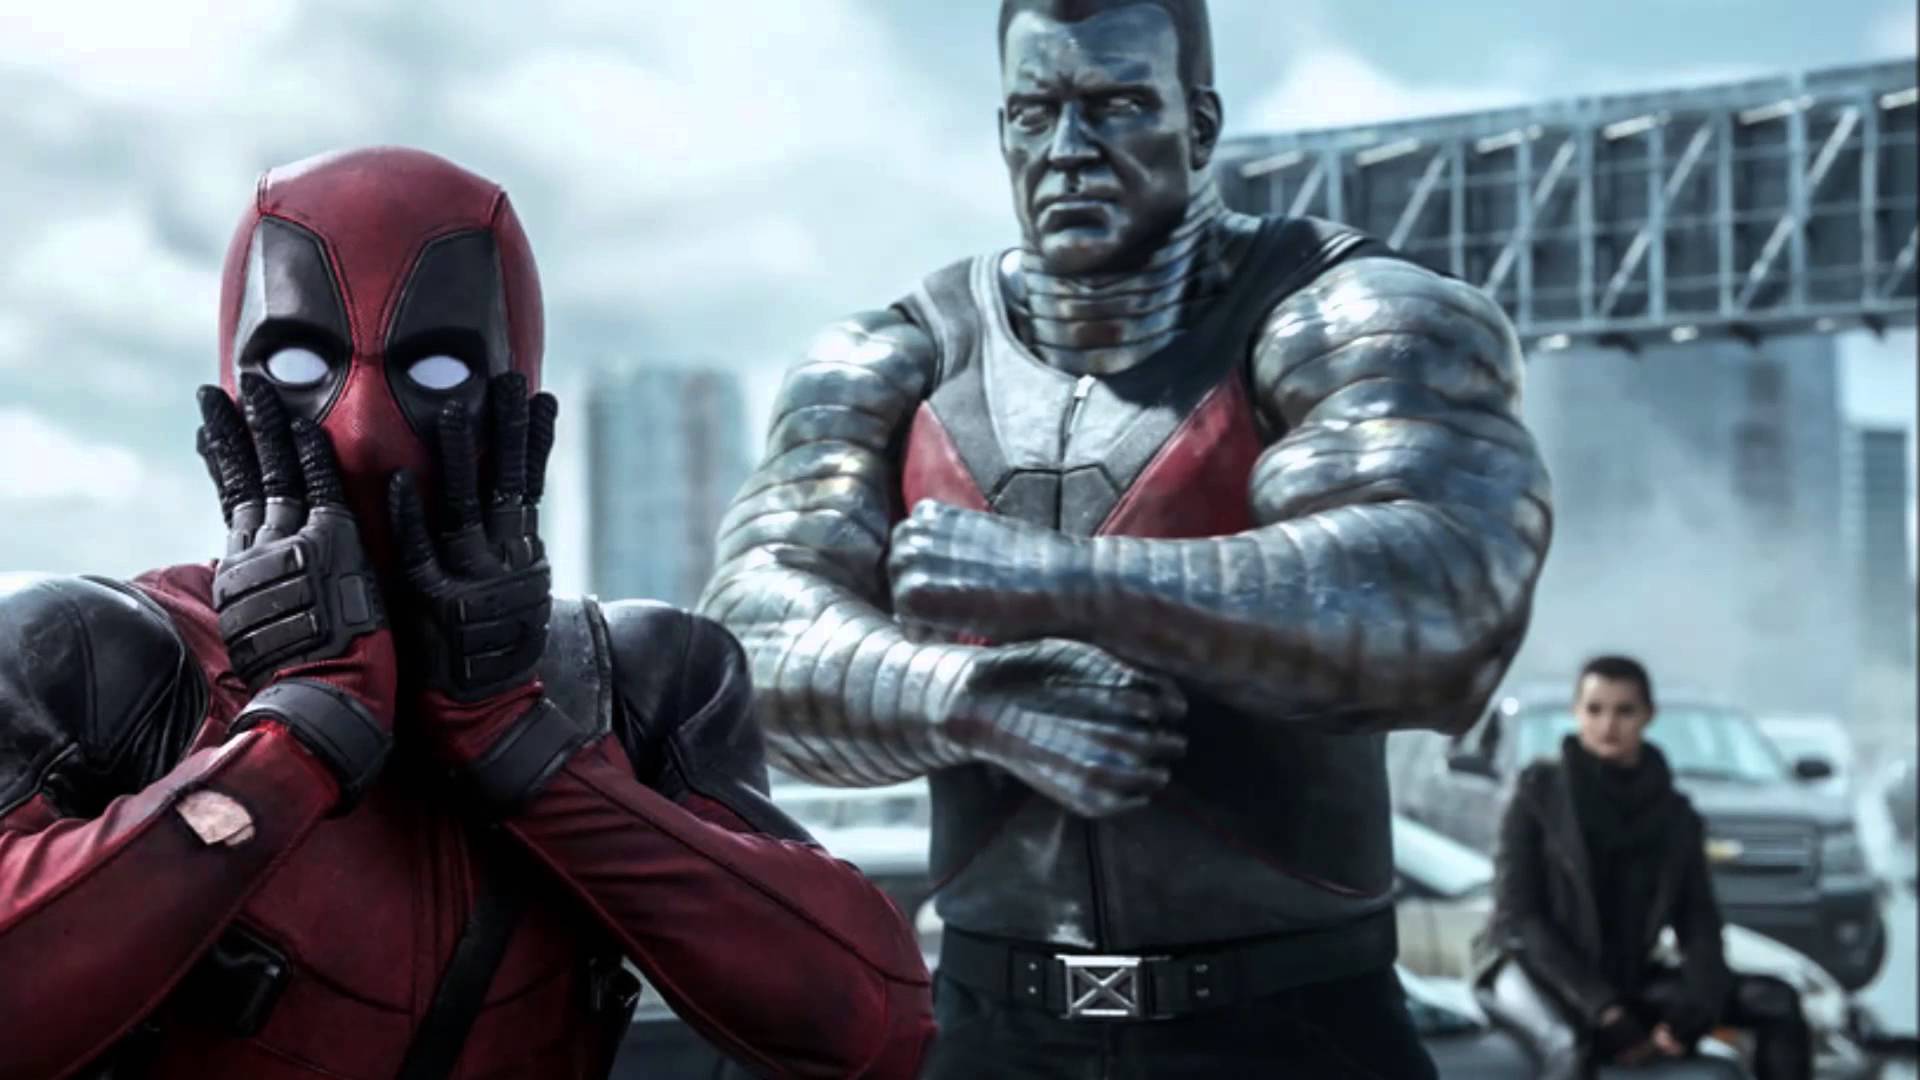 Deadpool gasps at the camera in 2018's Deadpool movie